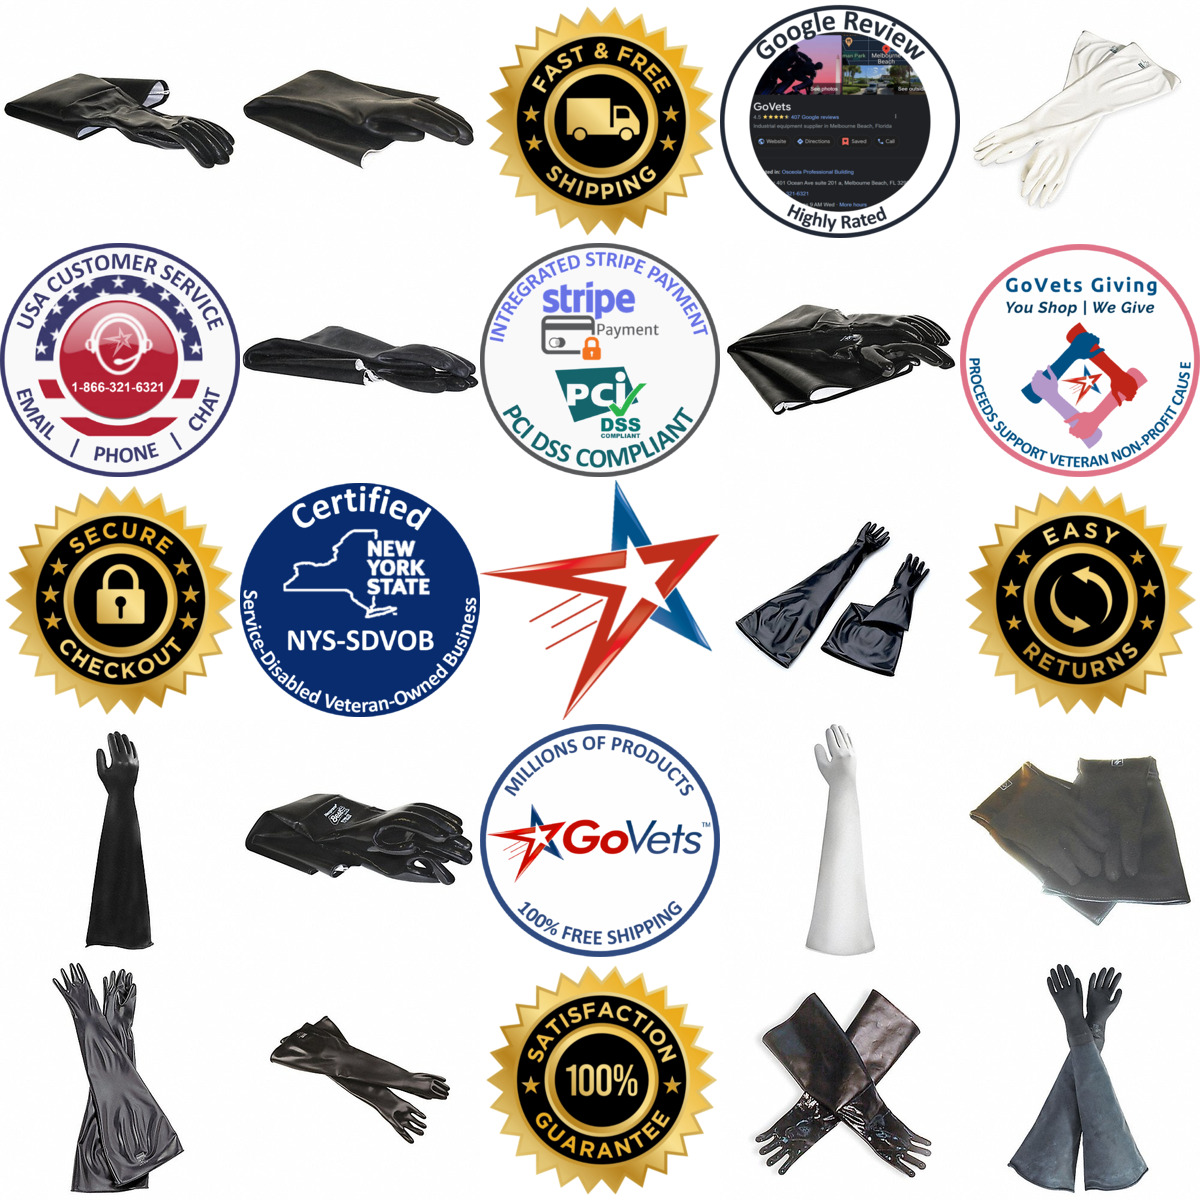 A selection of Glove Box Gloves products on GoVets